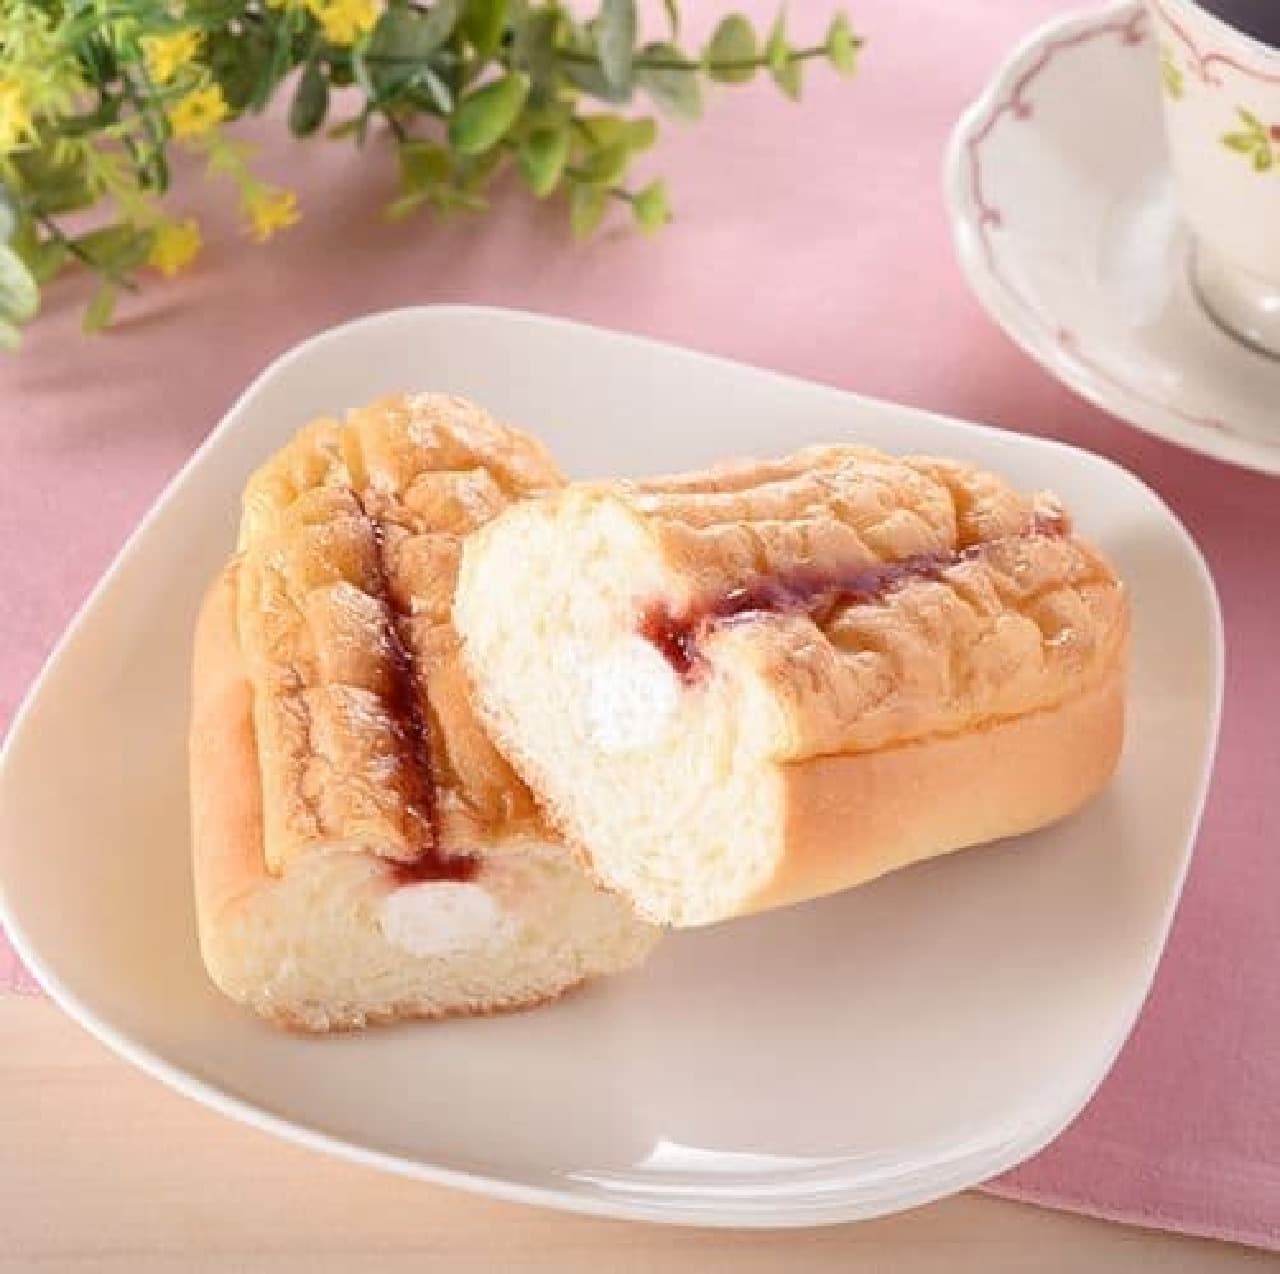 FamilyMart "Shoo Roll (Tochiotome Strawberry & Whipped Cream)"